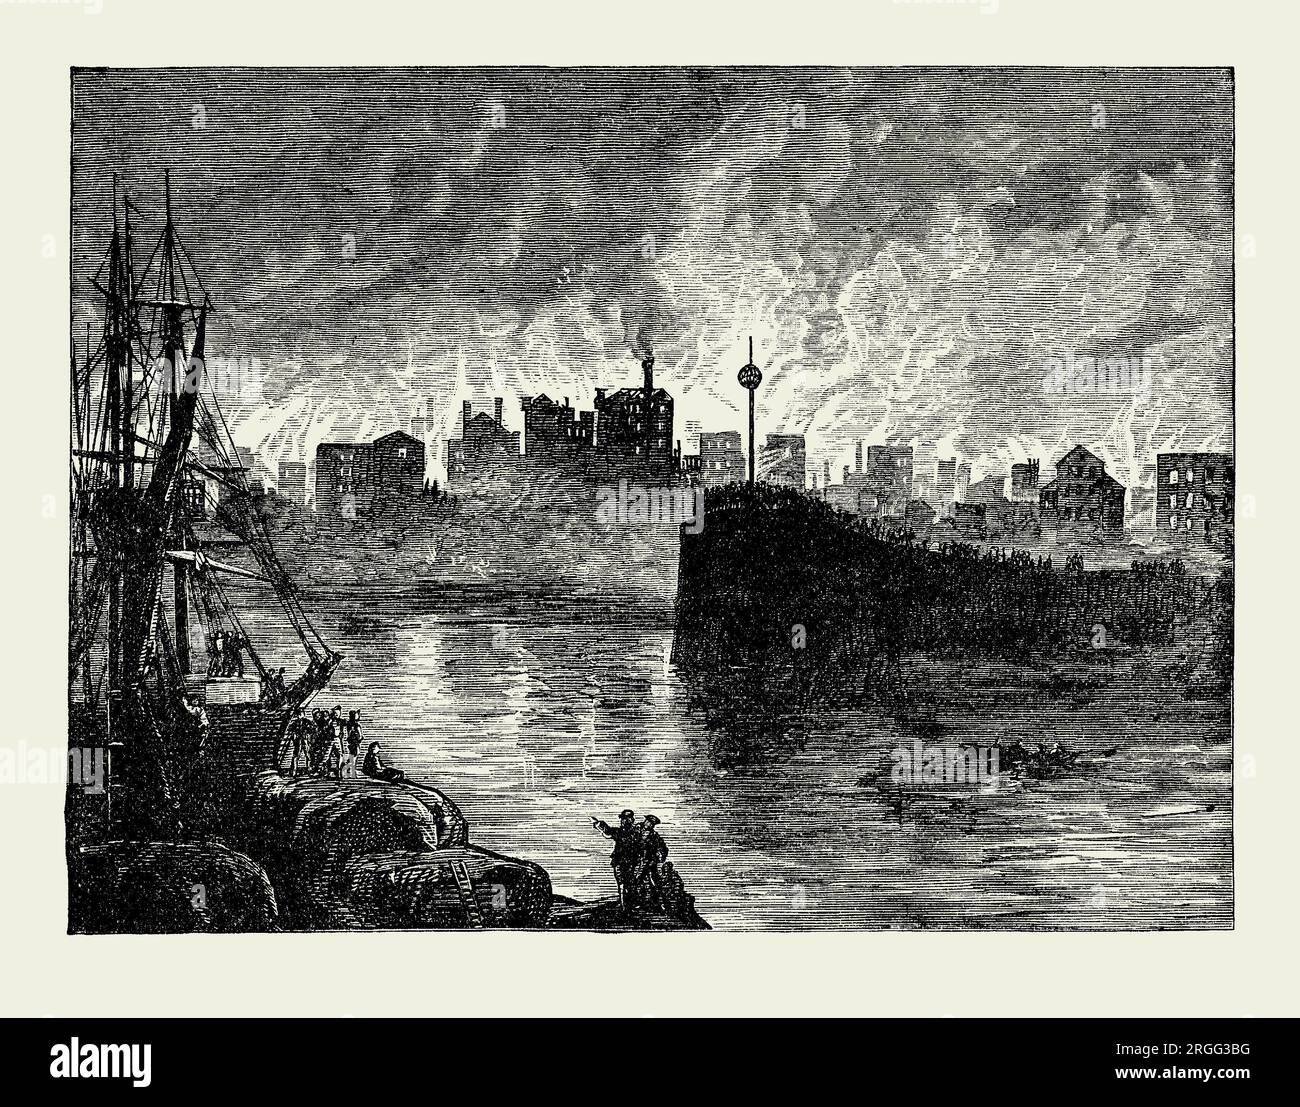 An old engraving of The Great Chicago Fire of 1871 from the waterfront. It is from an American history book of 1895. The conflagration burned in the city of Chicago, Illinois, USA during October 8–10 that year. The fire killed approximately 300 people, destroyed roughly 3.3 square miles of the city including over 17,000 structures, and left more than 100,000 residents homeless. The fire began in a neighbourhood southwest of the city centre. A long period of hot, dry, windy conditions, and the wooden construction contributed to the devastation. The fire destroyed much of central Chicago. Stock Photo